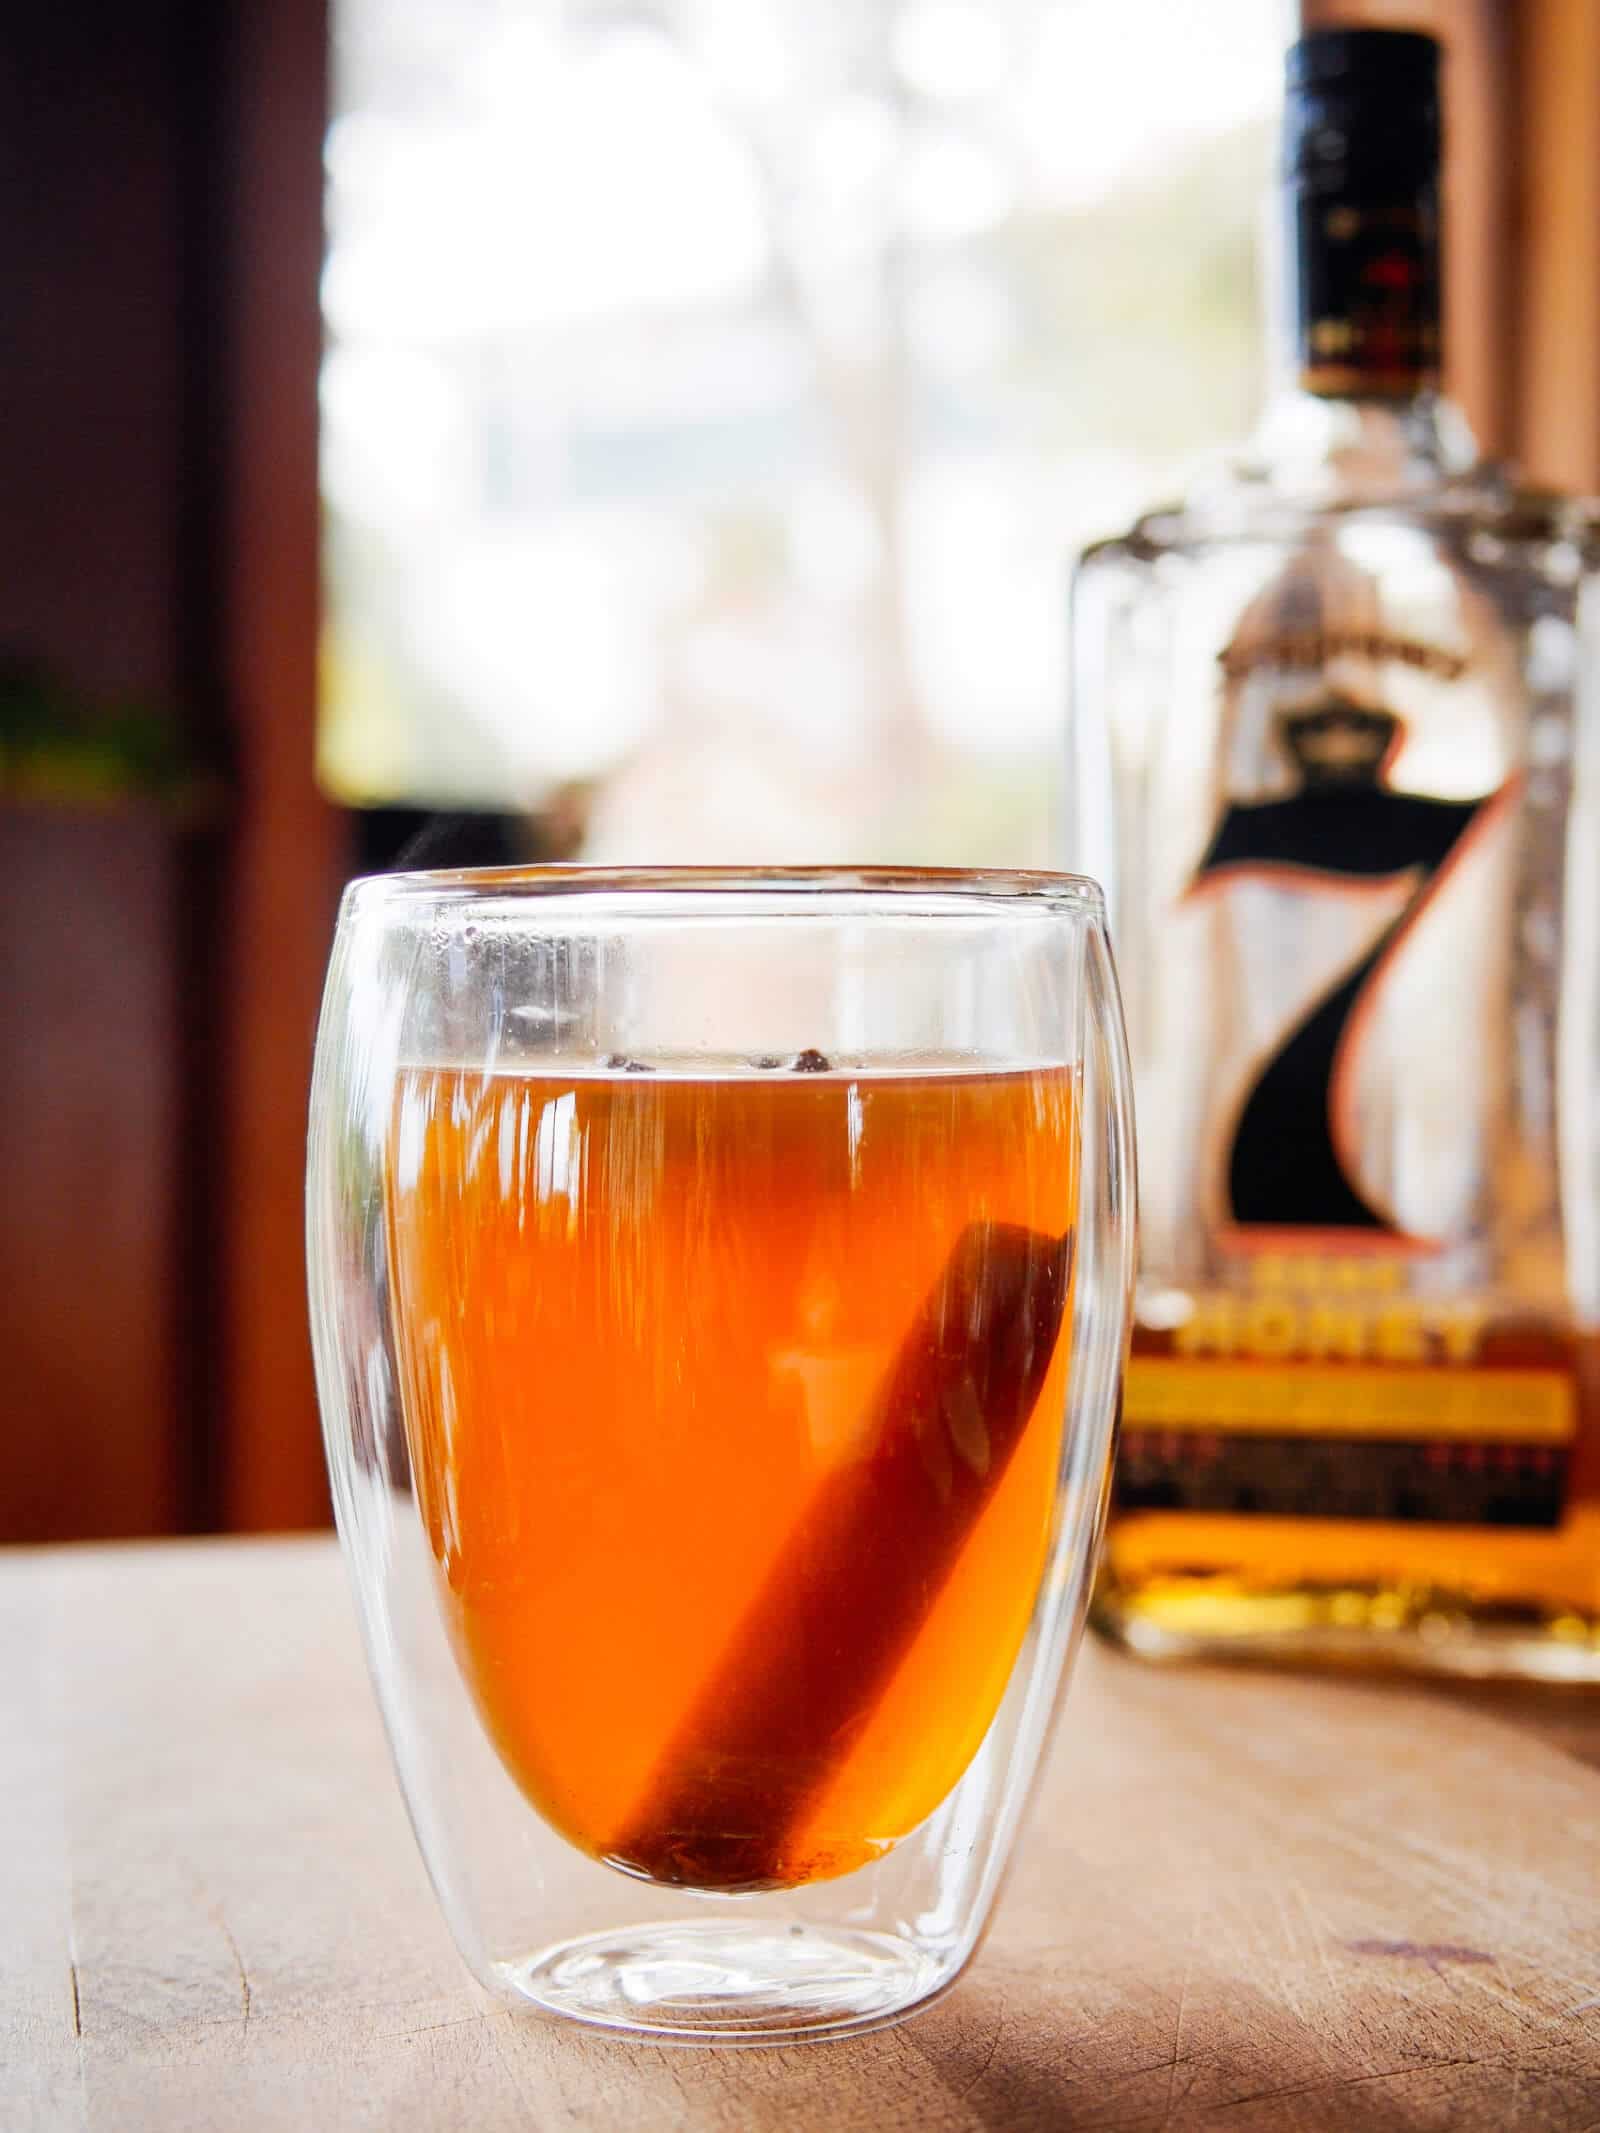 Cozy up with a honeylicious hot toddy recipe